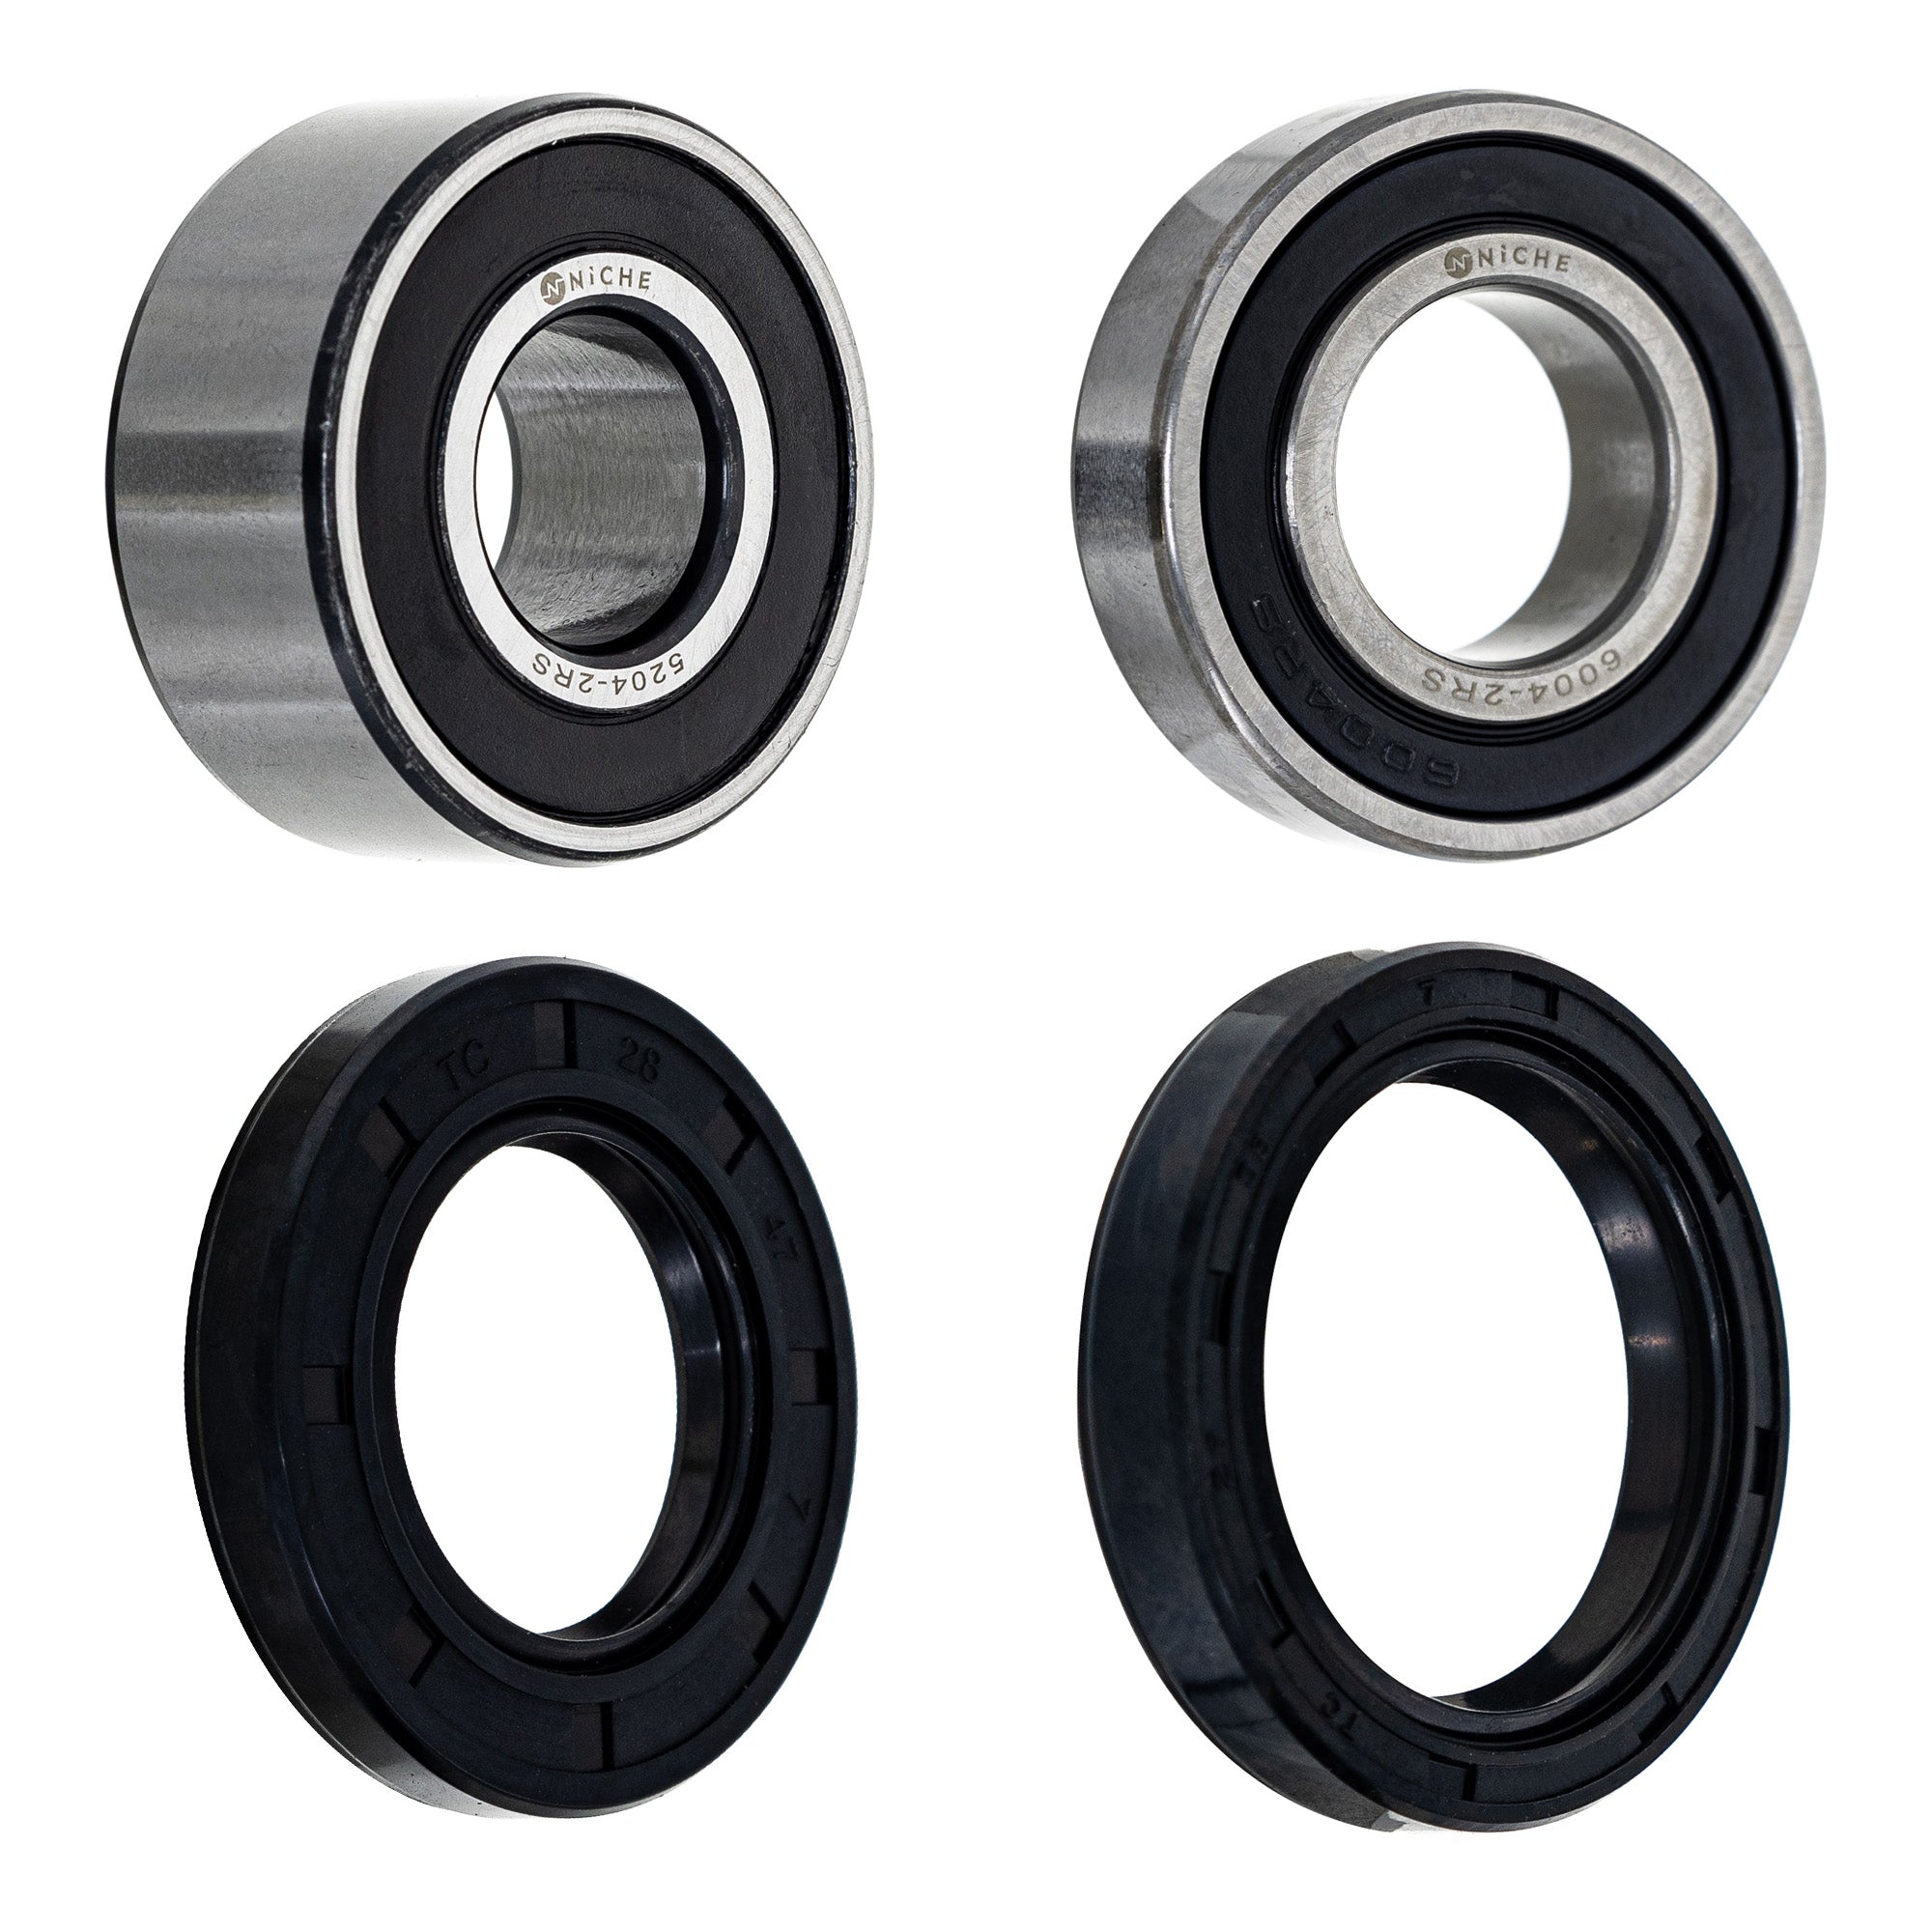 Wheel Bearing Seal Kit for zOTHER Ref No CR500R CR250R NICHE MK1008879